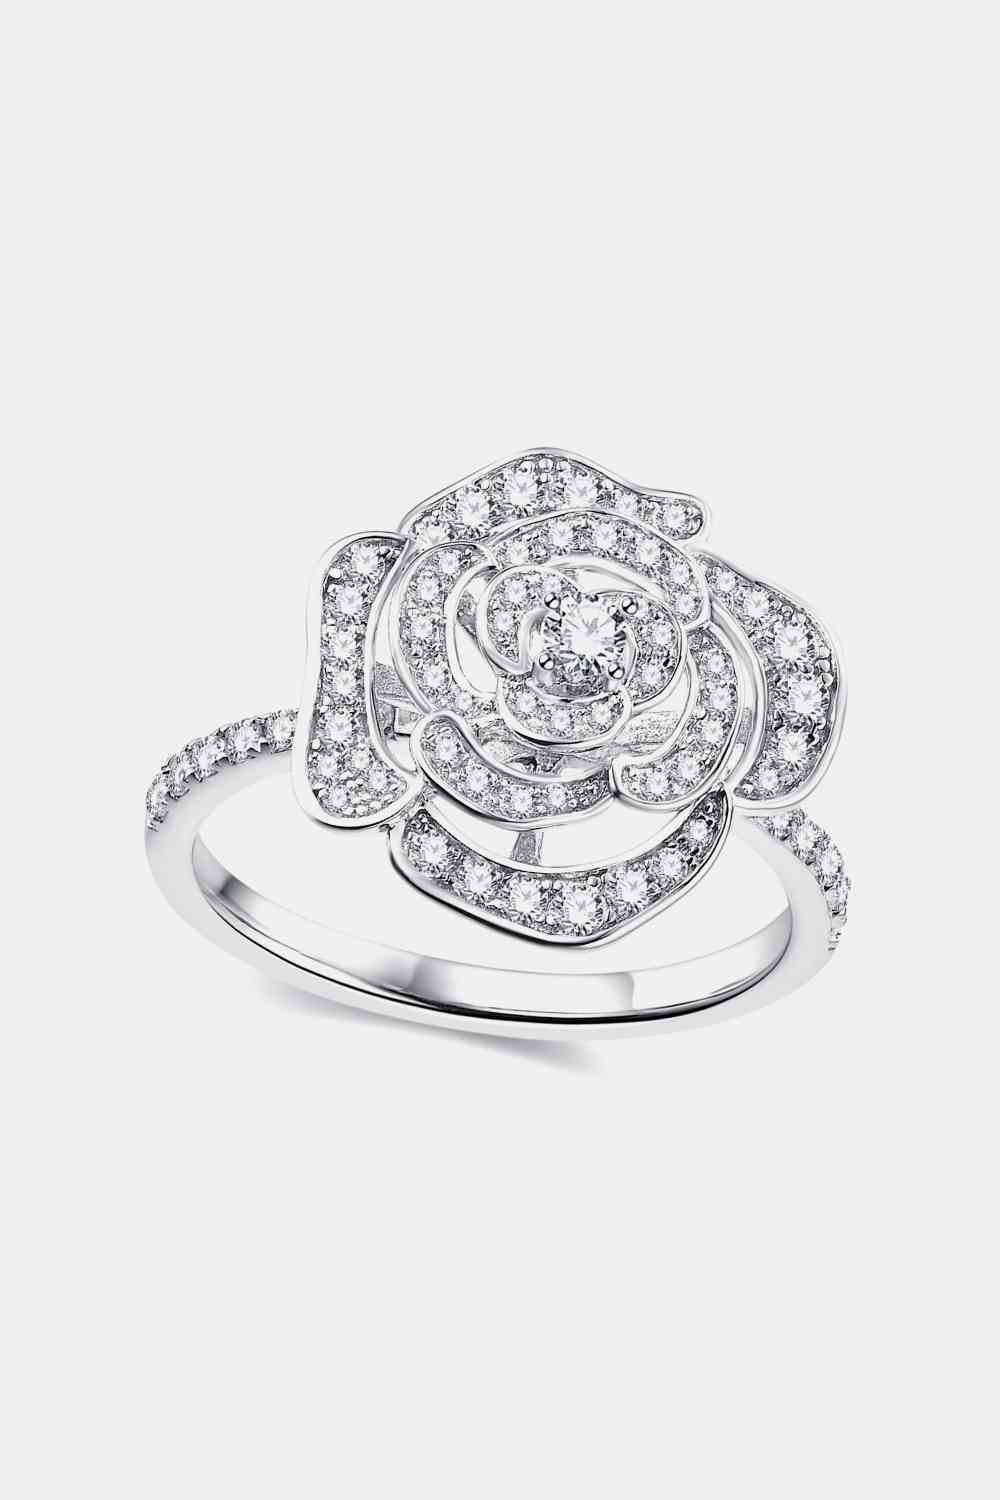 Moissanite Flower Shape Ring - Shop Tophatter Deals, Electronics, Fashion, Jewelry, Health, Beauty, Home Decor, Free Shipping